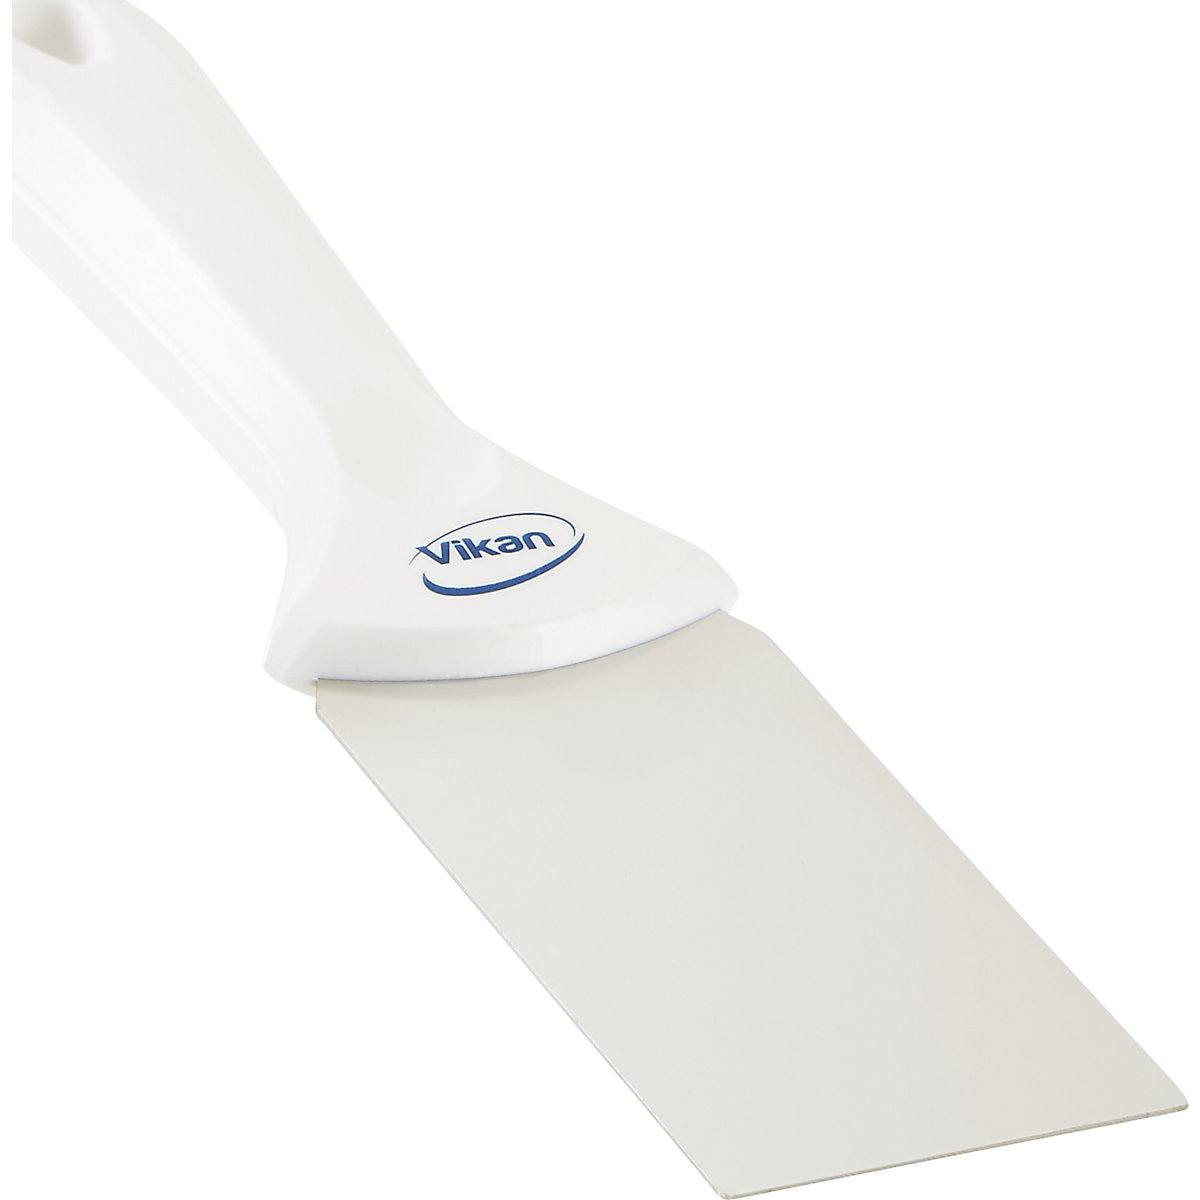 Hand scraper with stainless steel blade – Vikan, width 50 mm, pack of 10, white-10